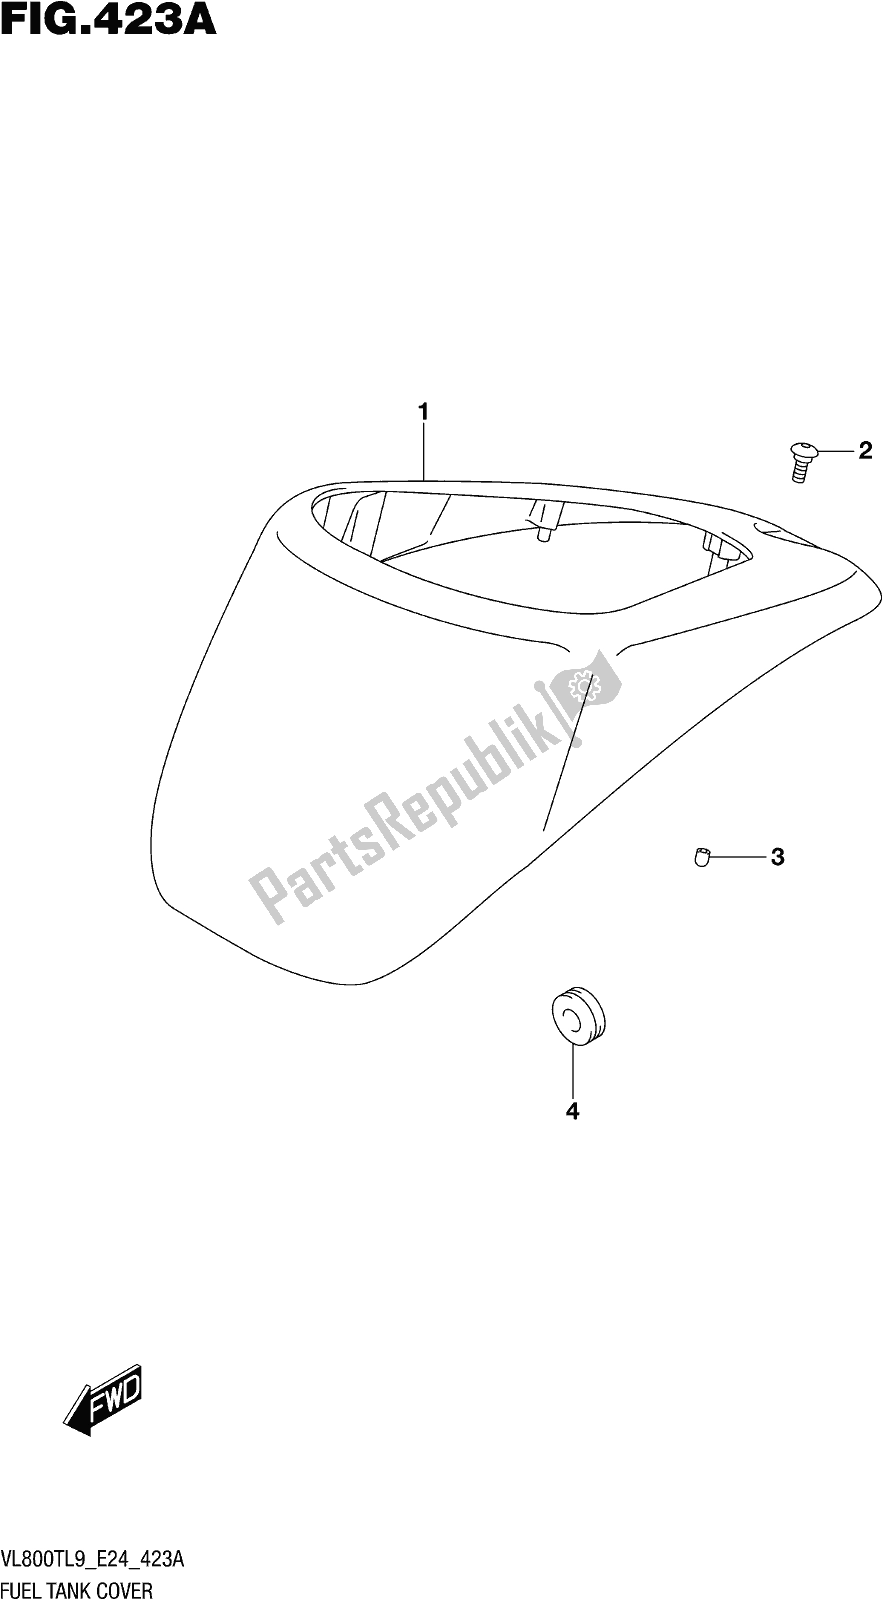 All parts for the Fig. 423a Fuel Tank Cover of the Suzuki VL 800T 2019